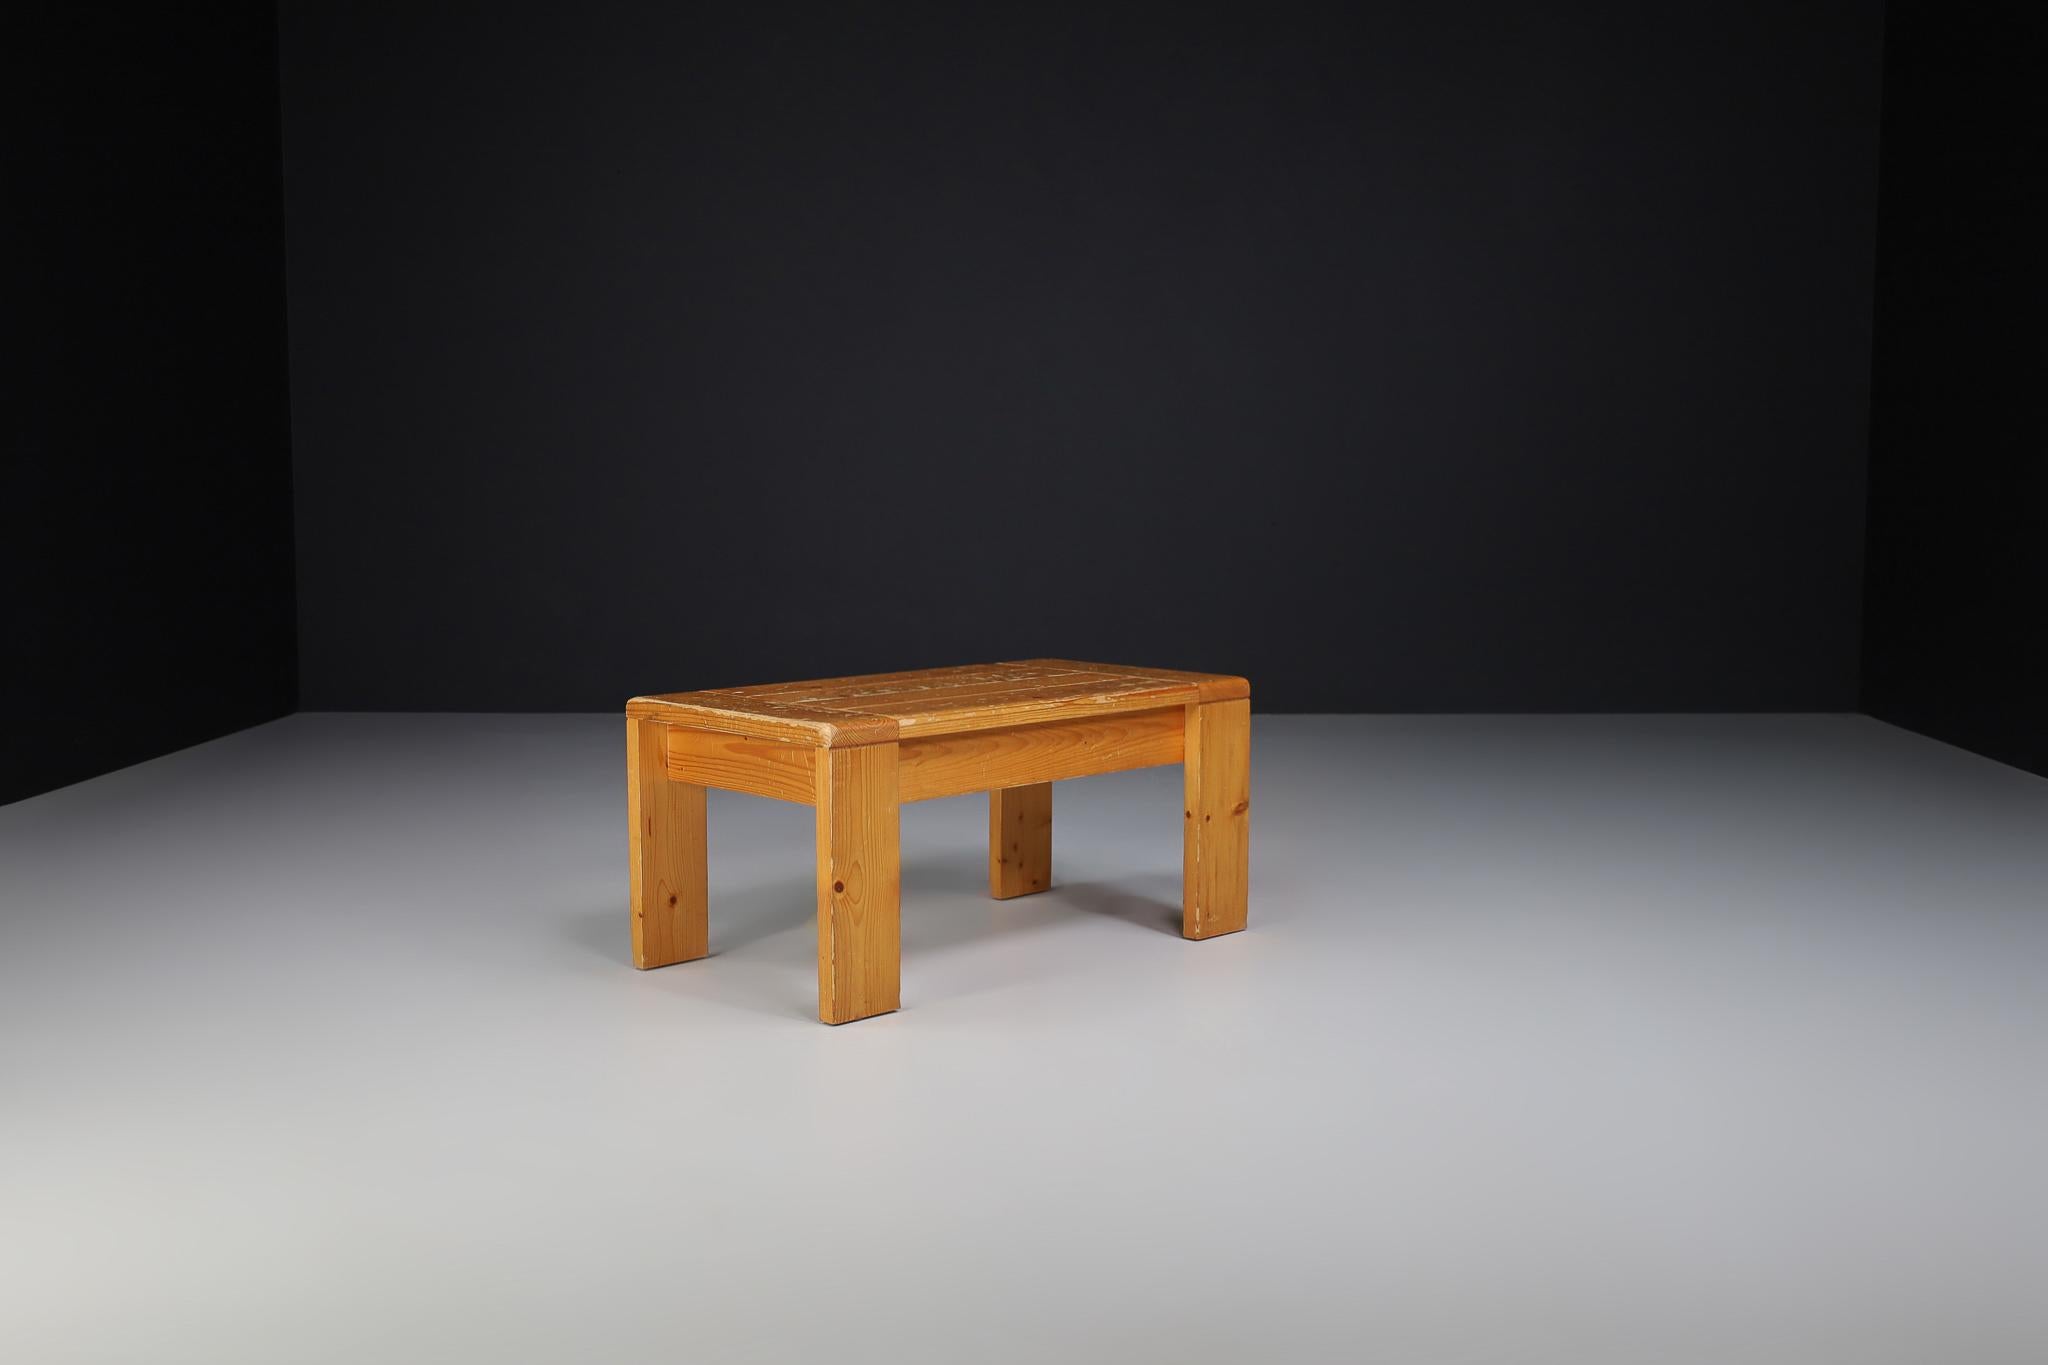 Charlotte Perriand style coffee tables in pine wood for Les Arcs ski resort, circa 1960 manufactured in France. These are the iconic Charlotte Perriand simple and straightforward pine tables used commonly throughout the ski resort. These tables are